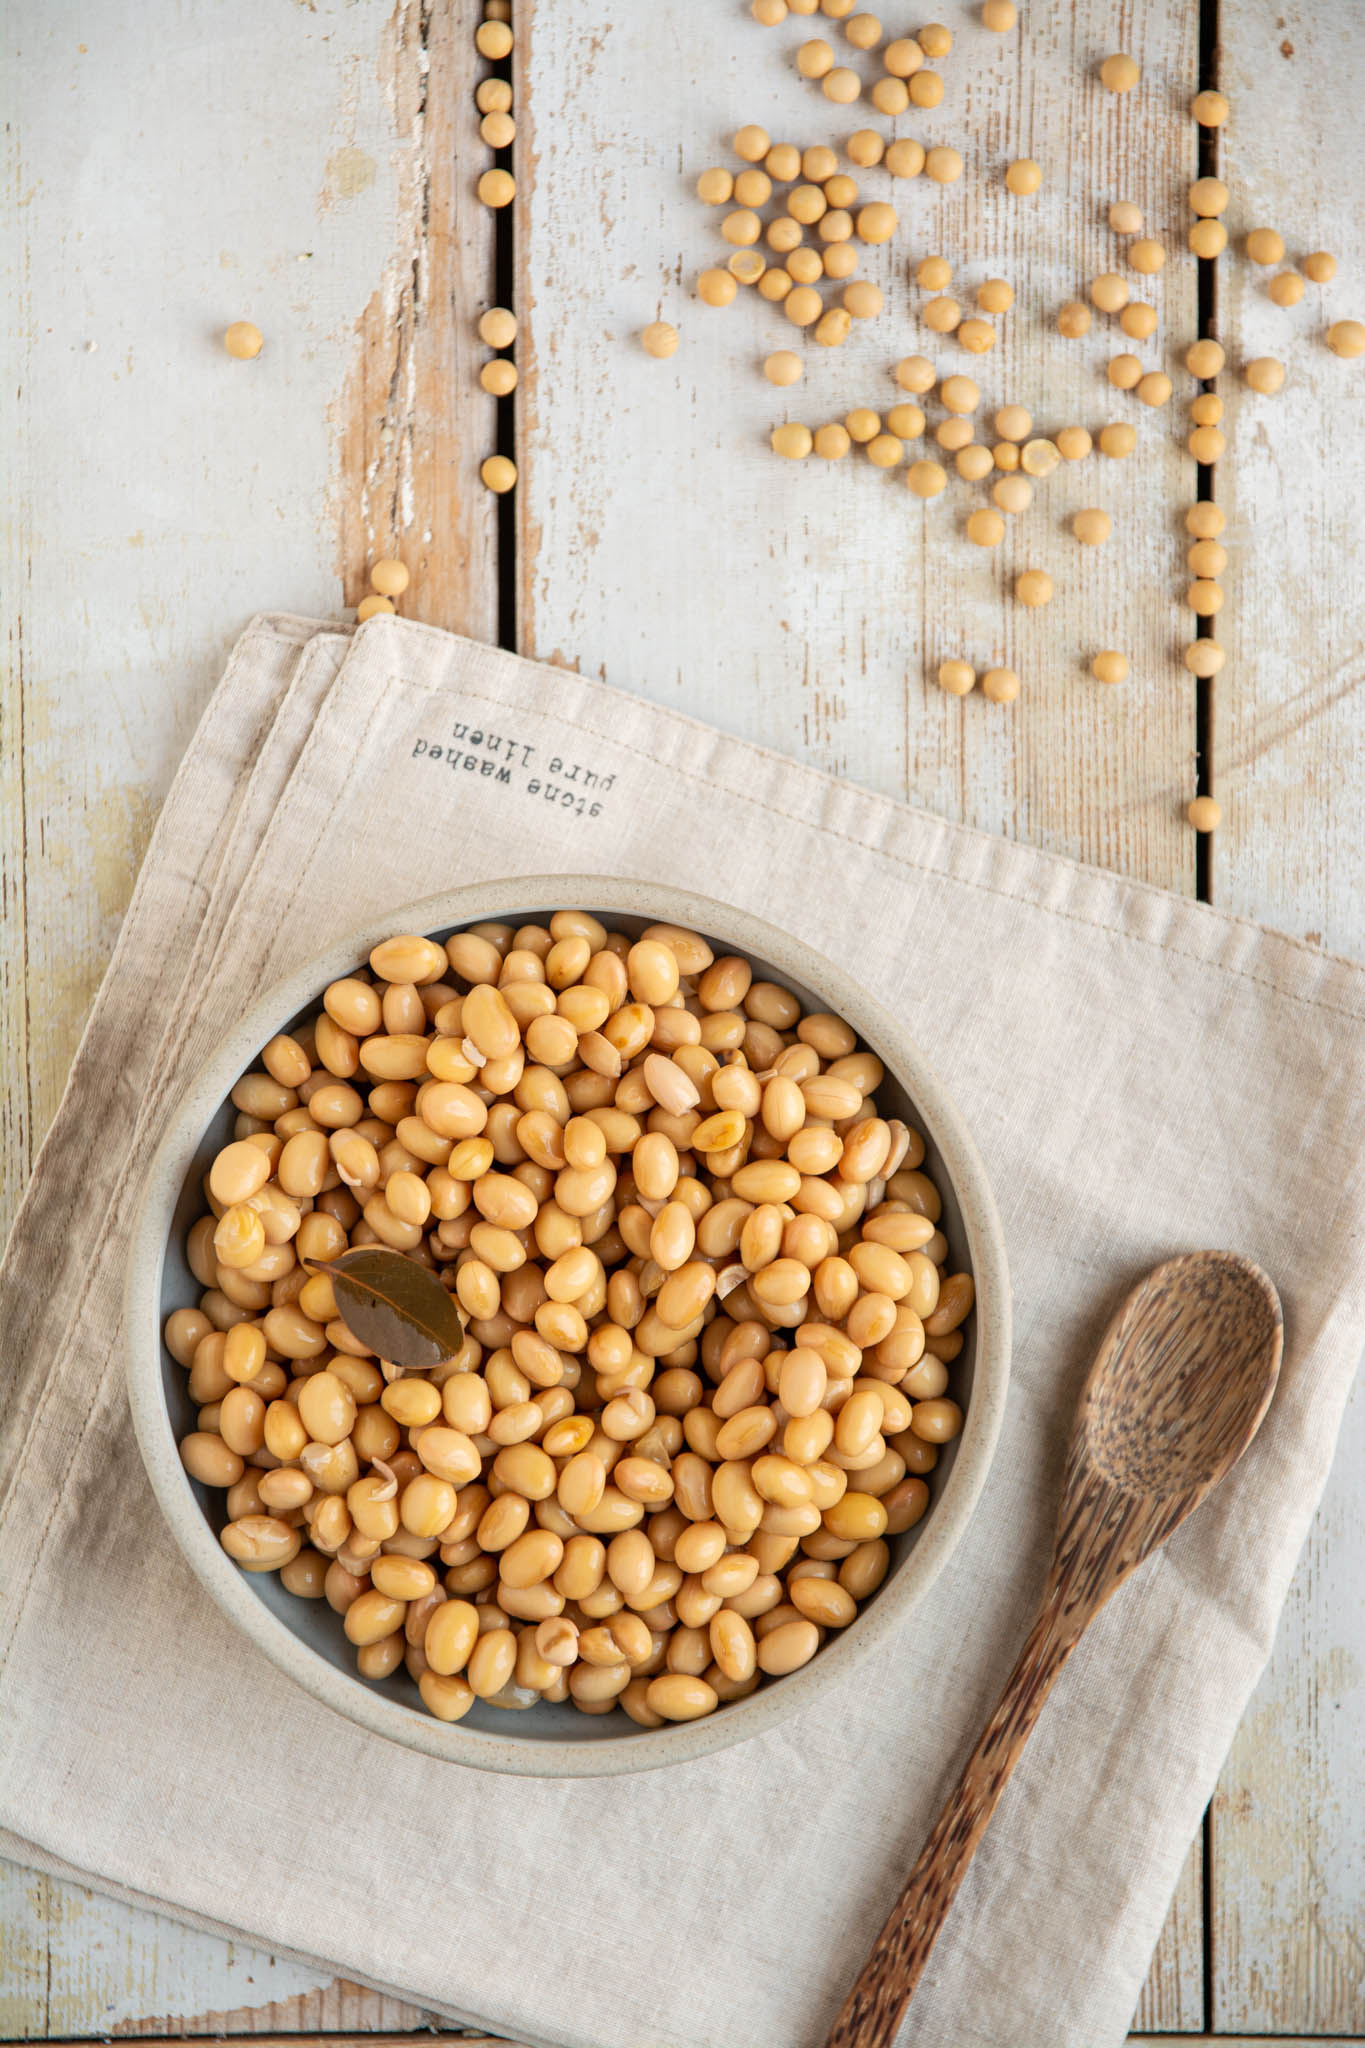 Learn how to cook soybeans at home in a regular pot or a saucepan. Use the cooked soybeans for high protein hummus, in soups, stews, and salads, or nibble on them as they are.